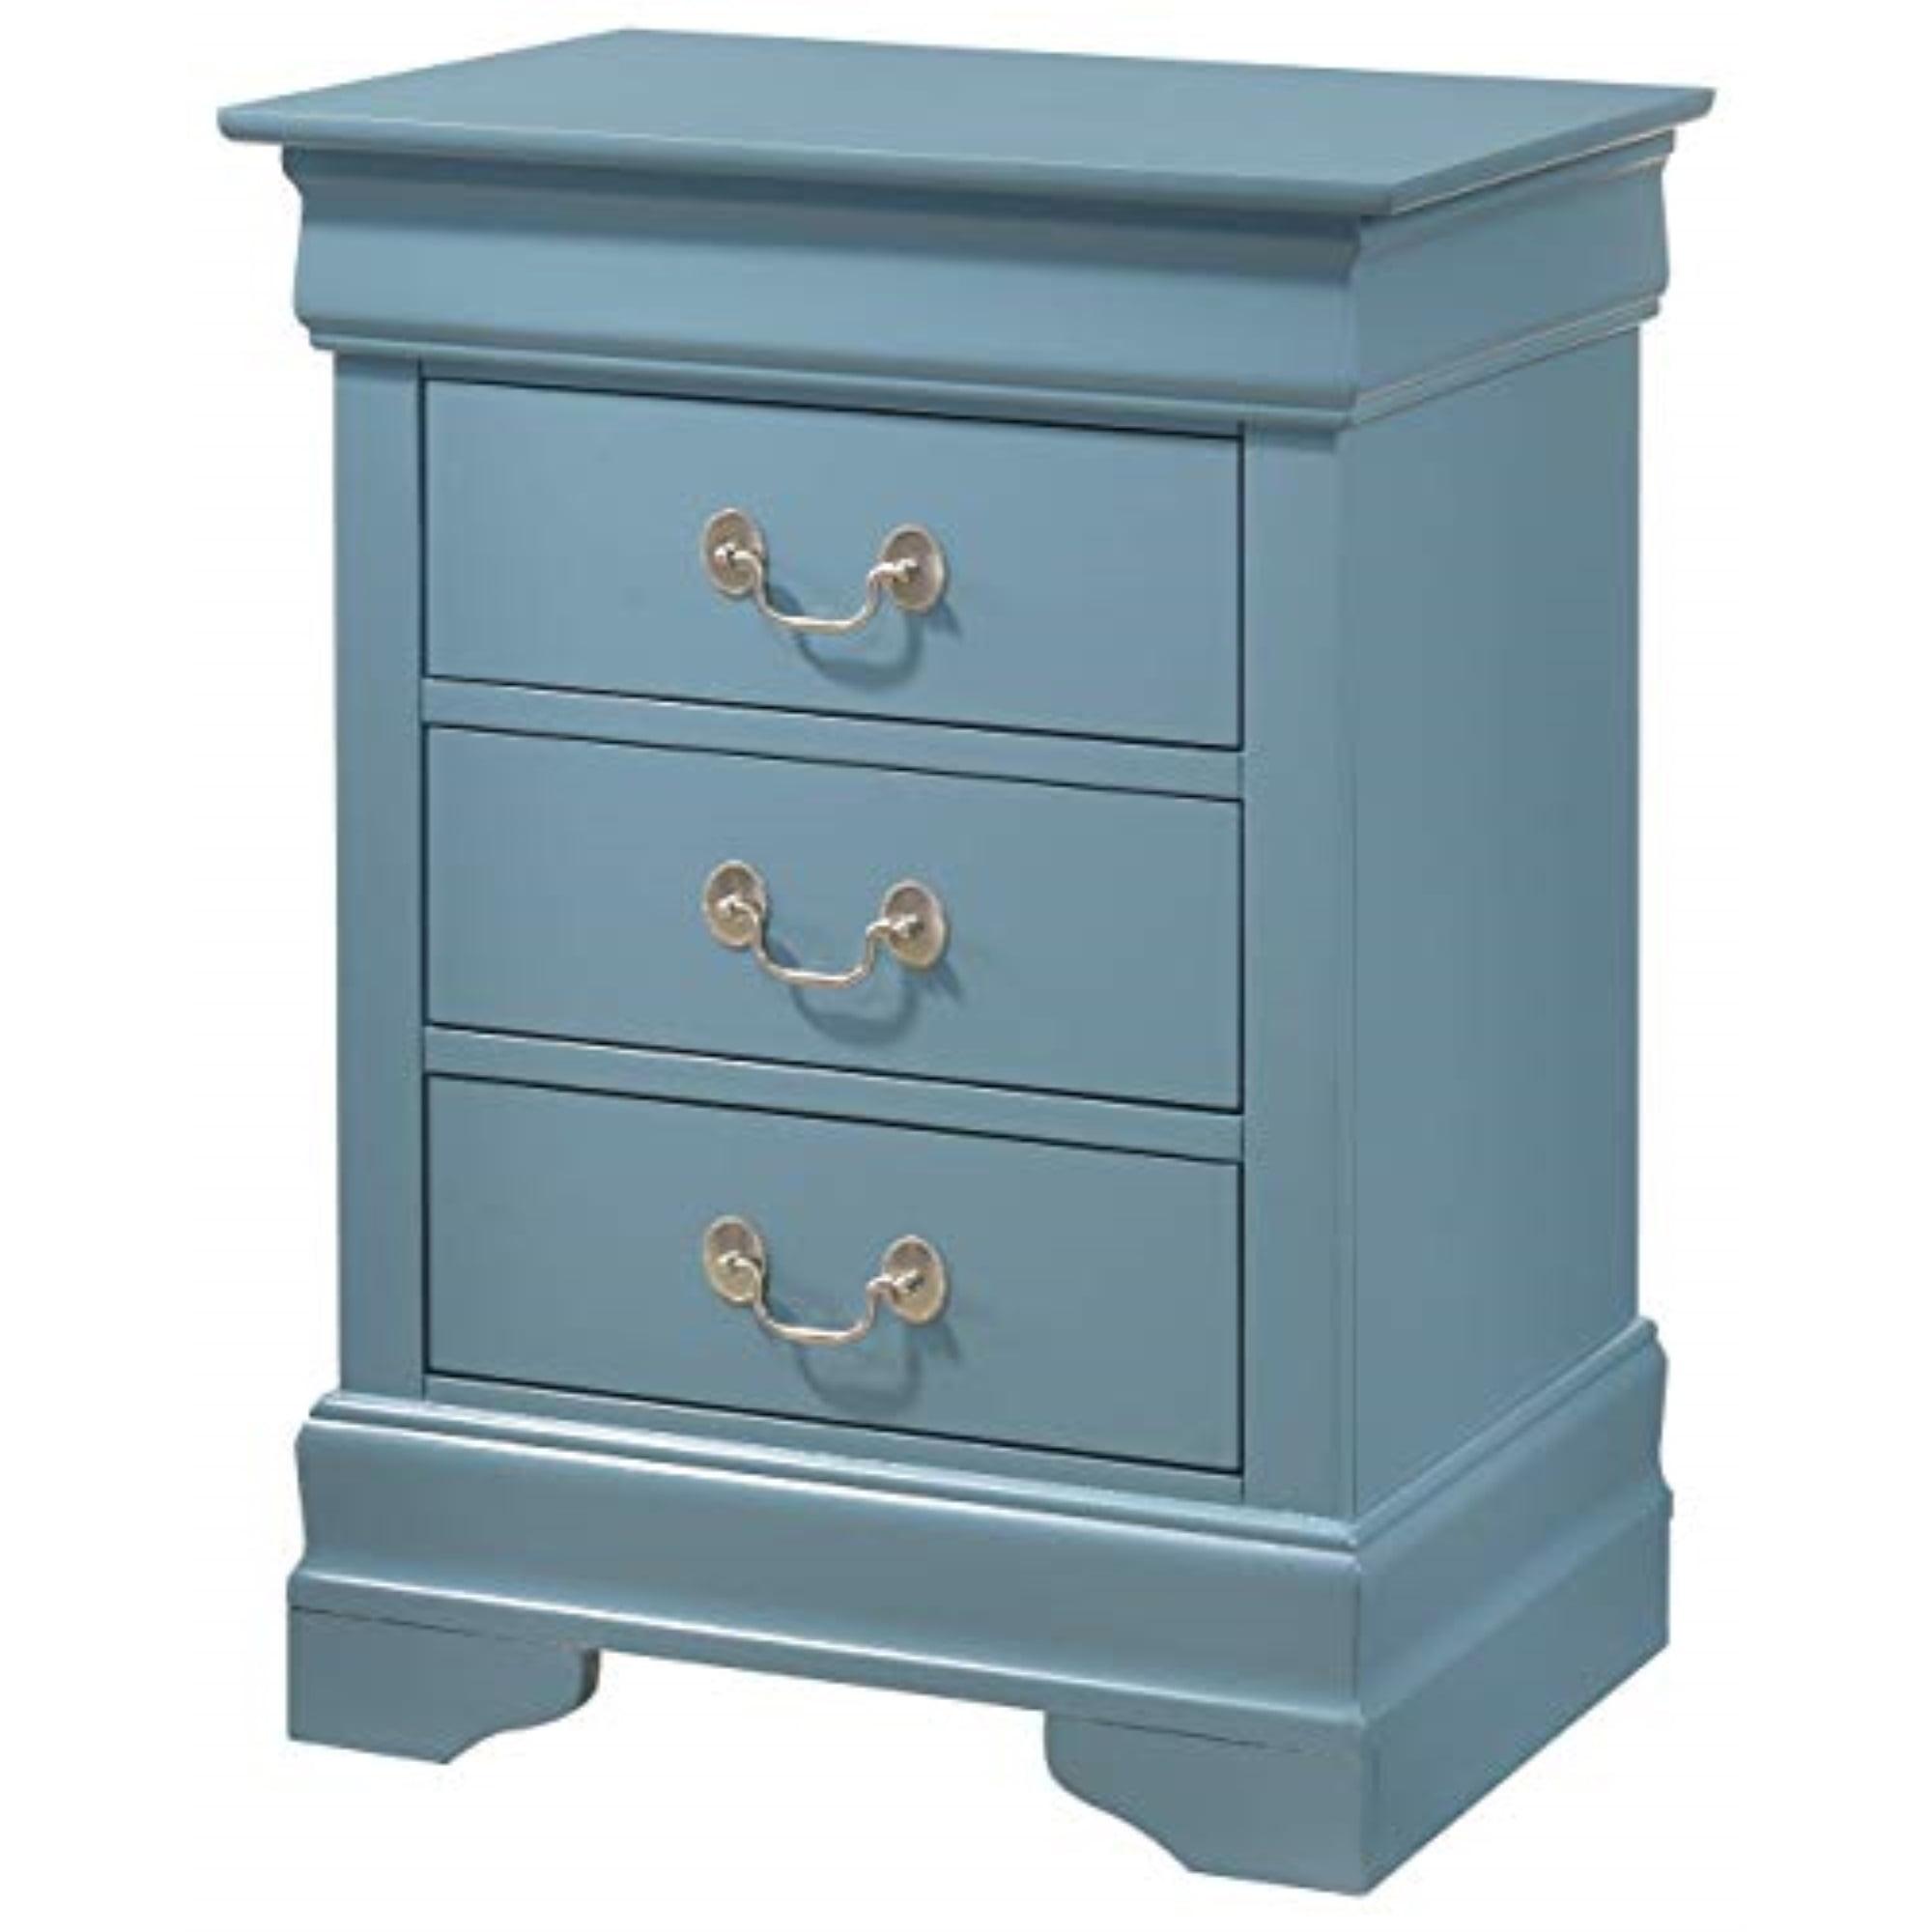 Transitional 3-Drawer Wood Nightstand with Metal Handles - Blue